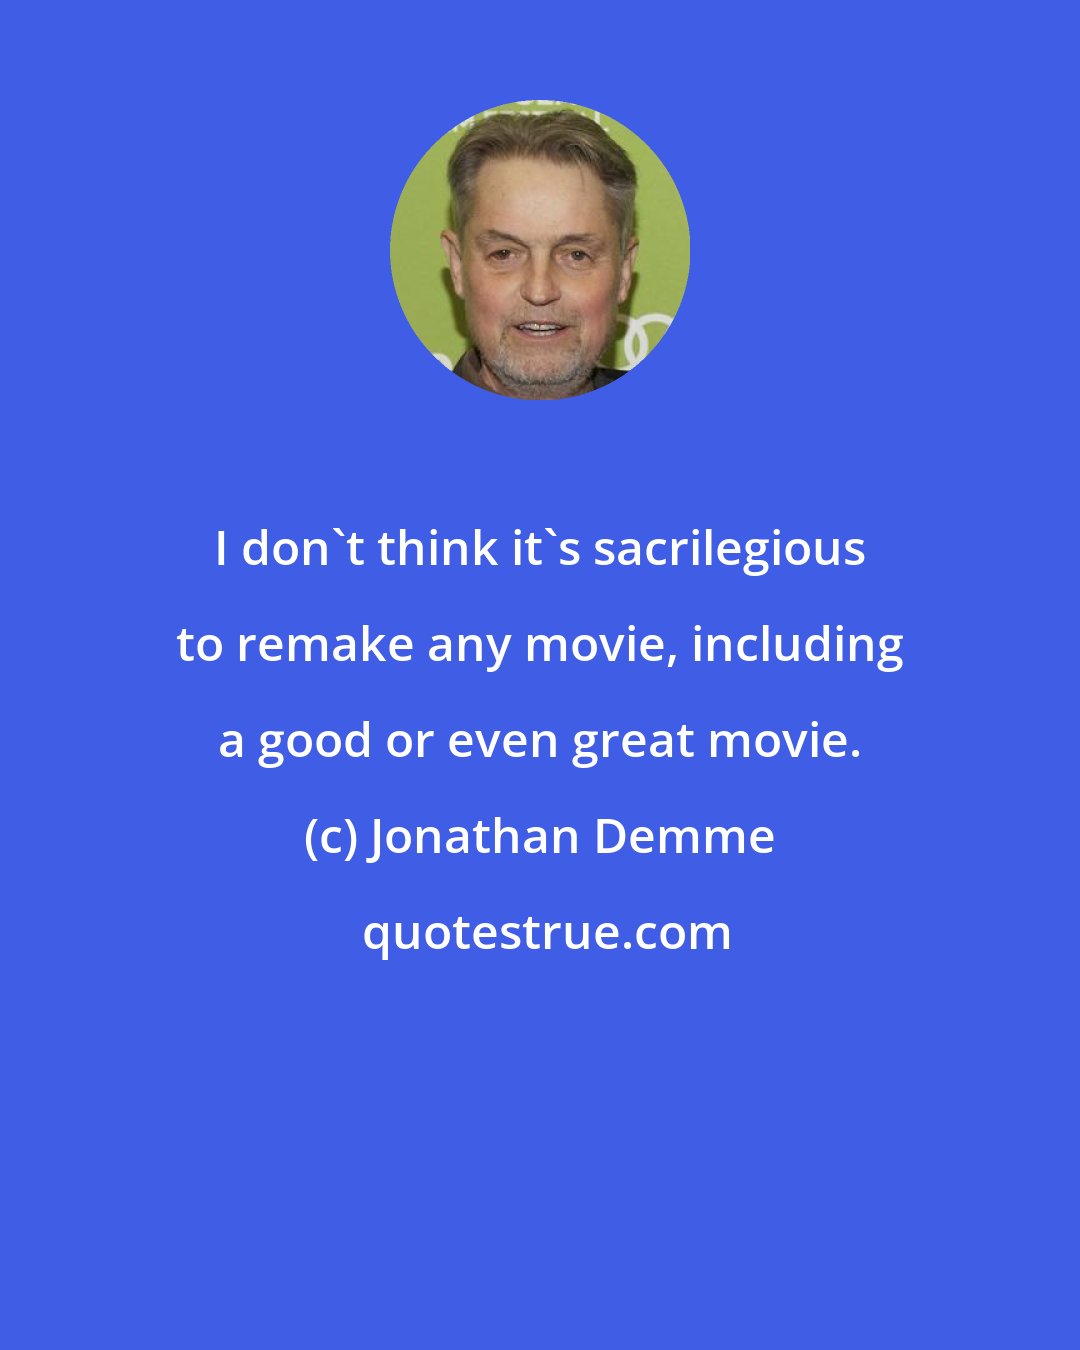 Jonathan Demme: I don't think it's sacrilegious to remake any movie, including a good or even great movie.